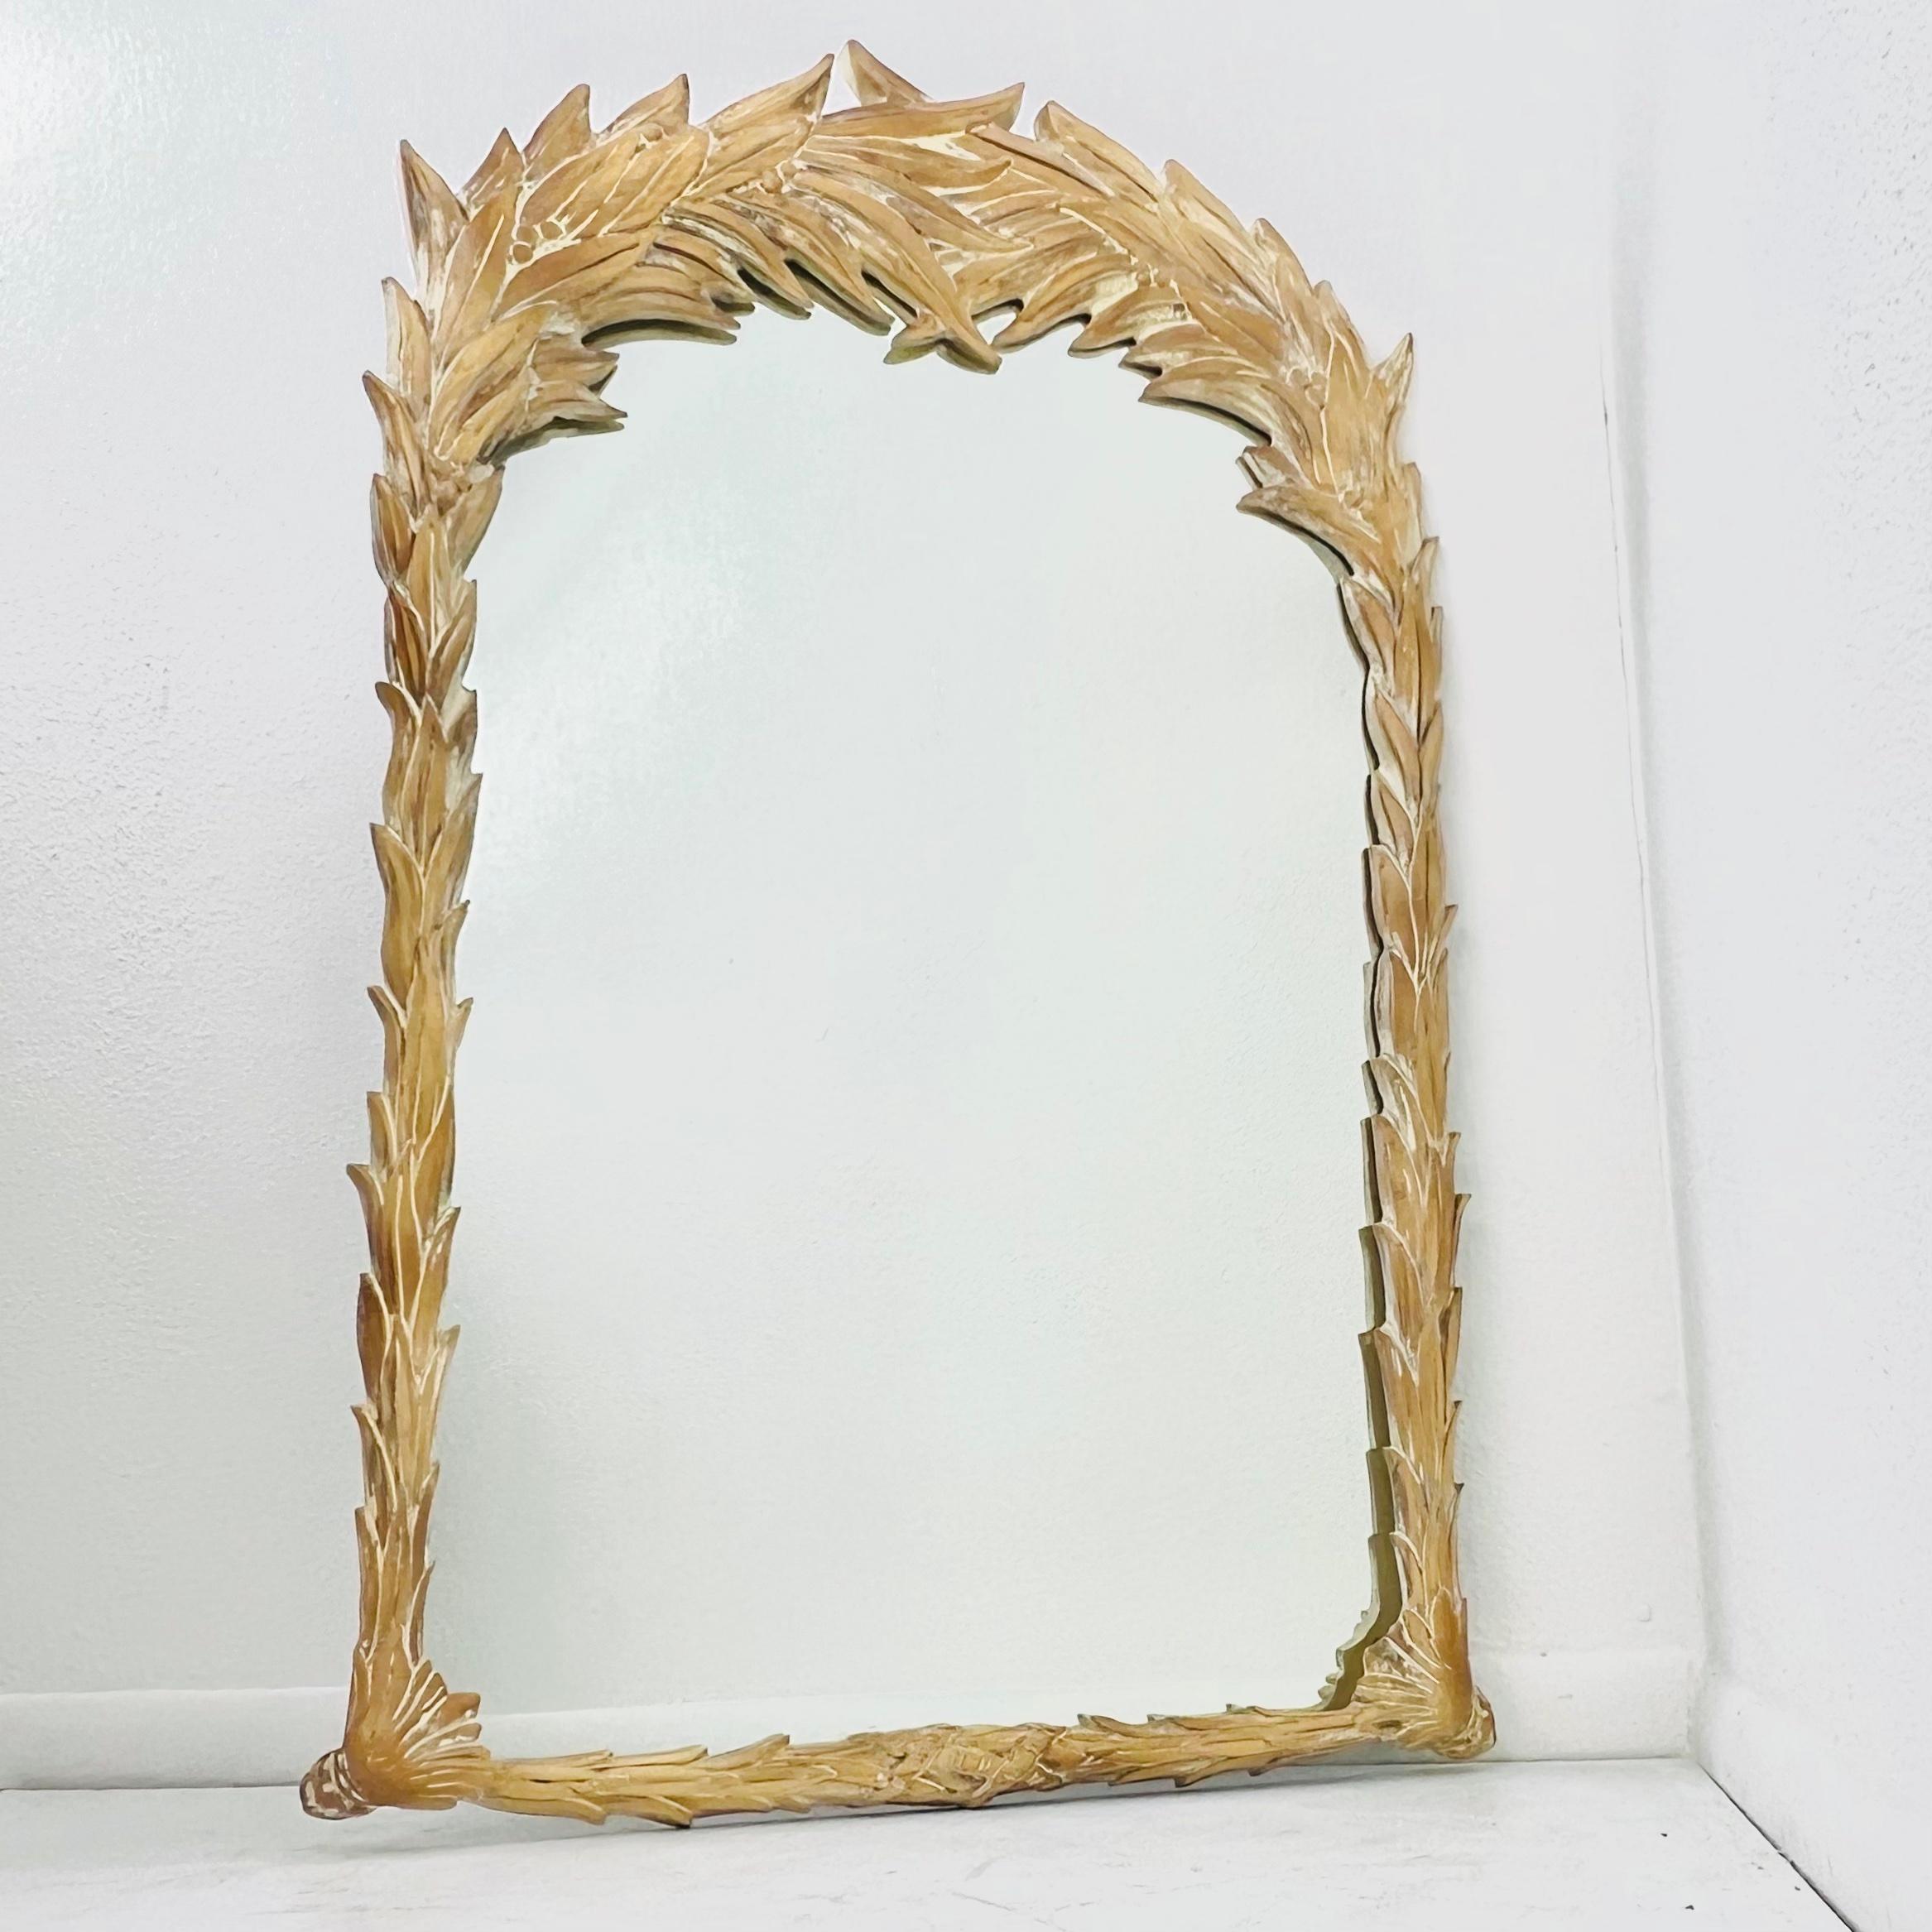 Late 20th Century Carved Wood Palm Frond Mirror in the Style of Serge Roche For Sale